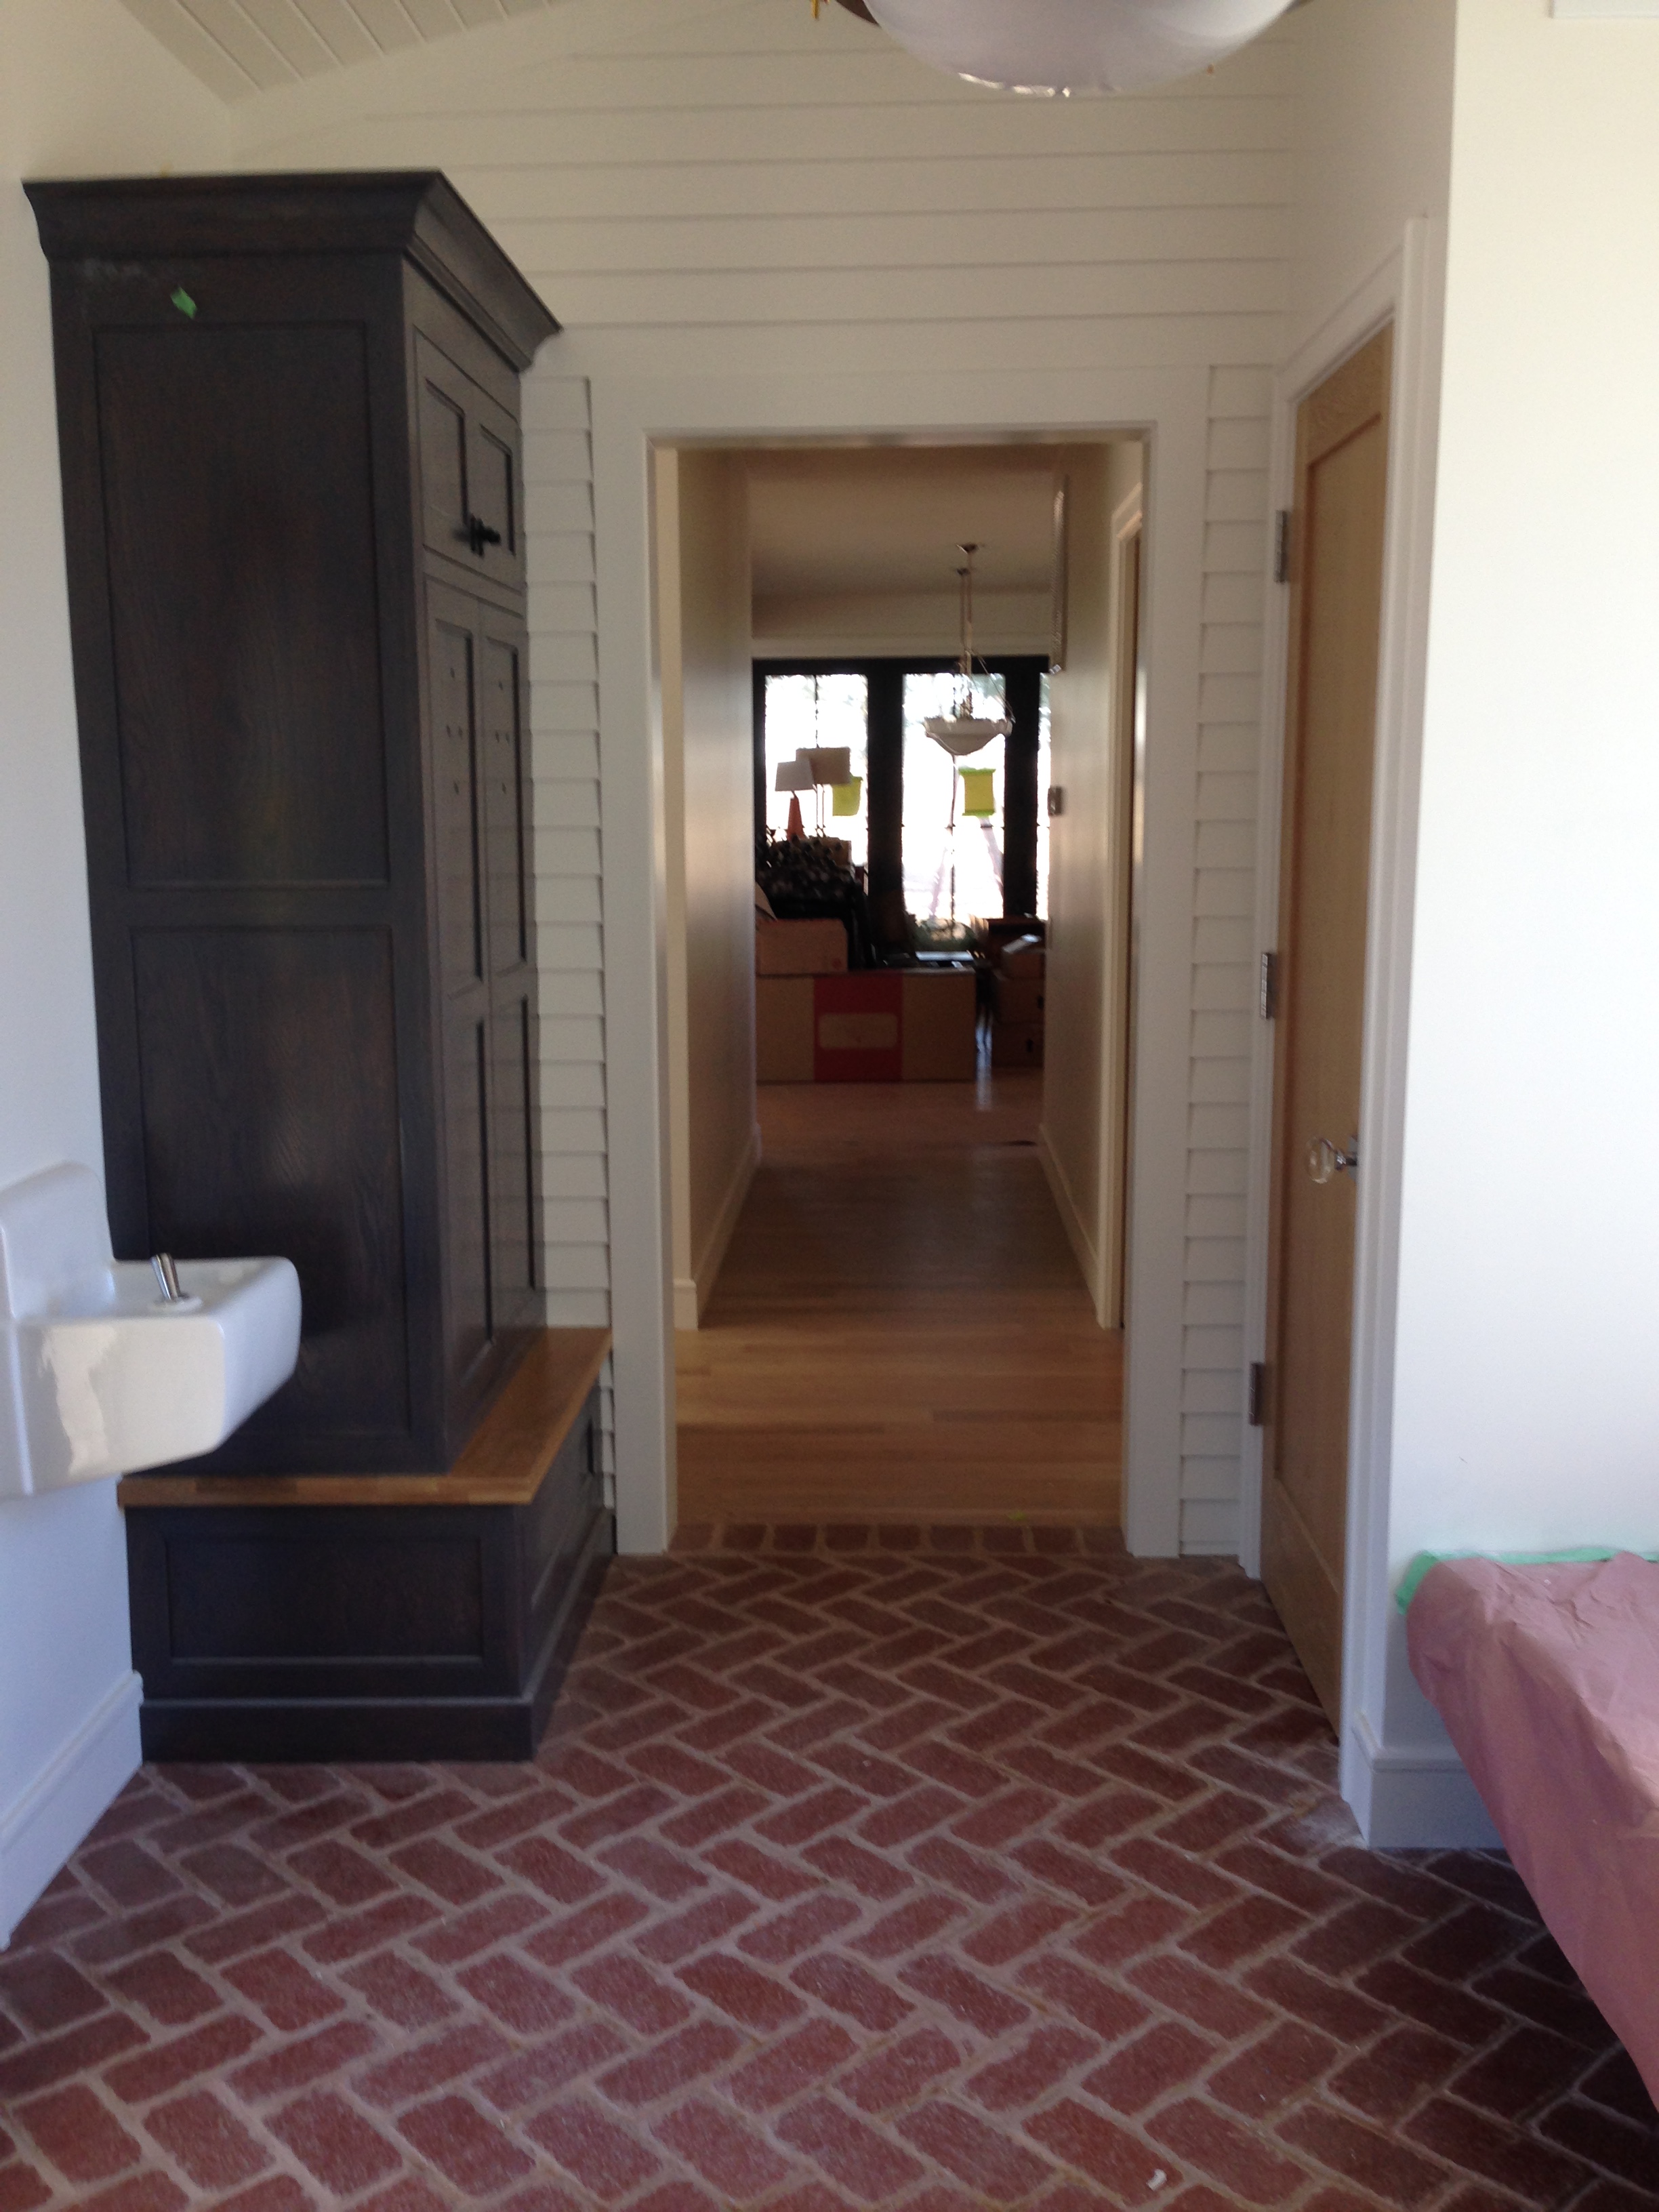 Mudroom/Breezeway from Garage to Main House